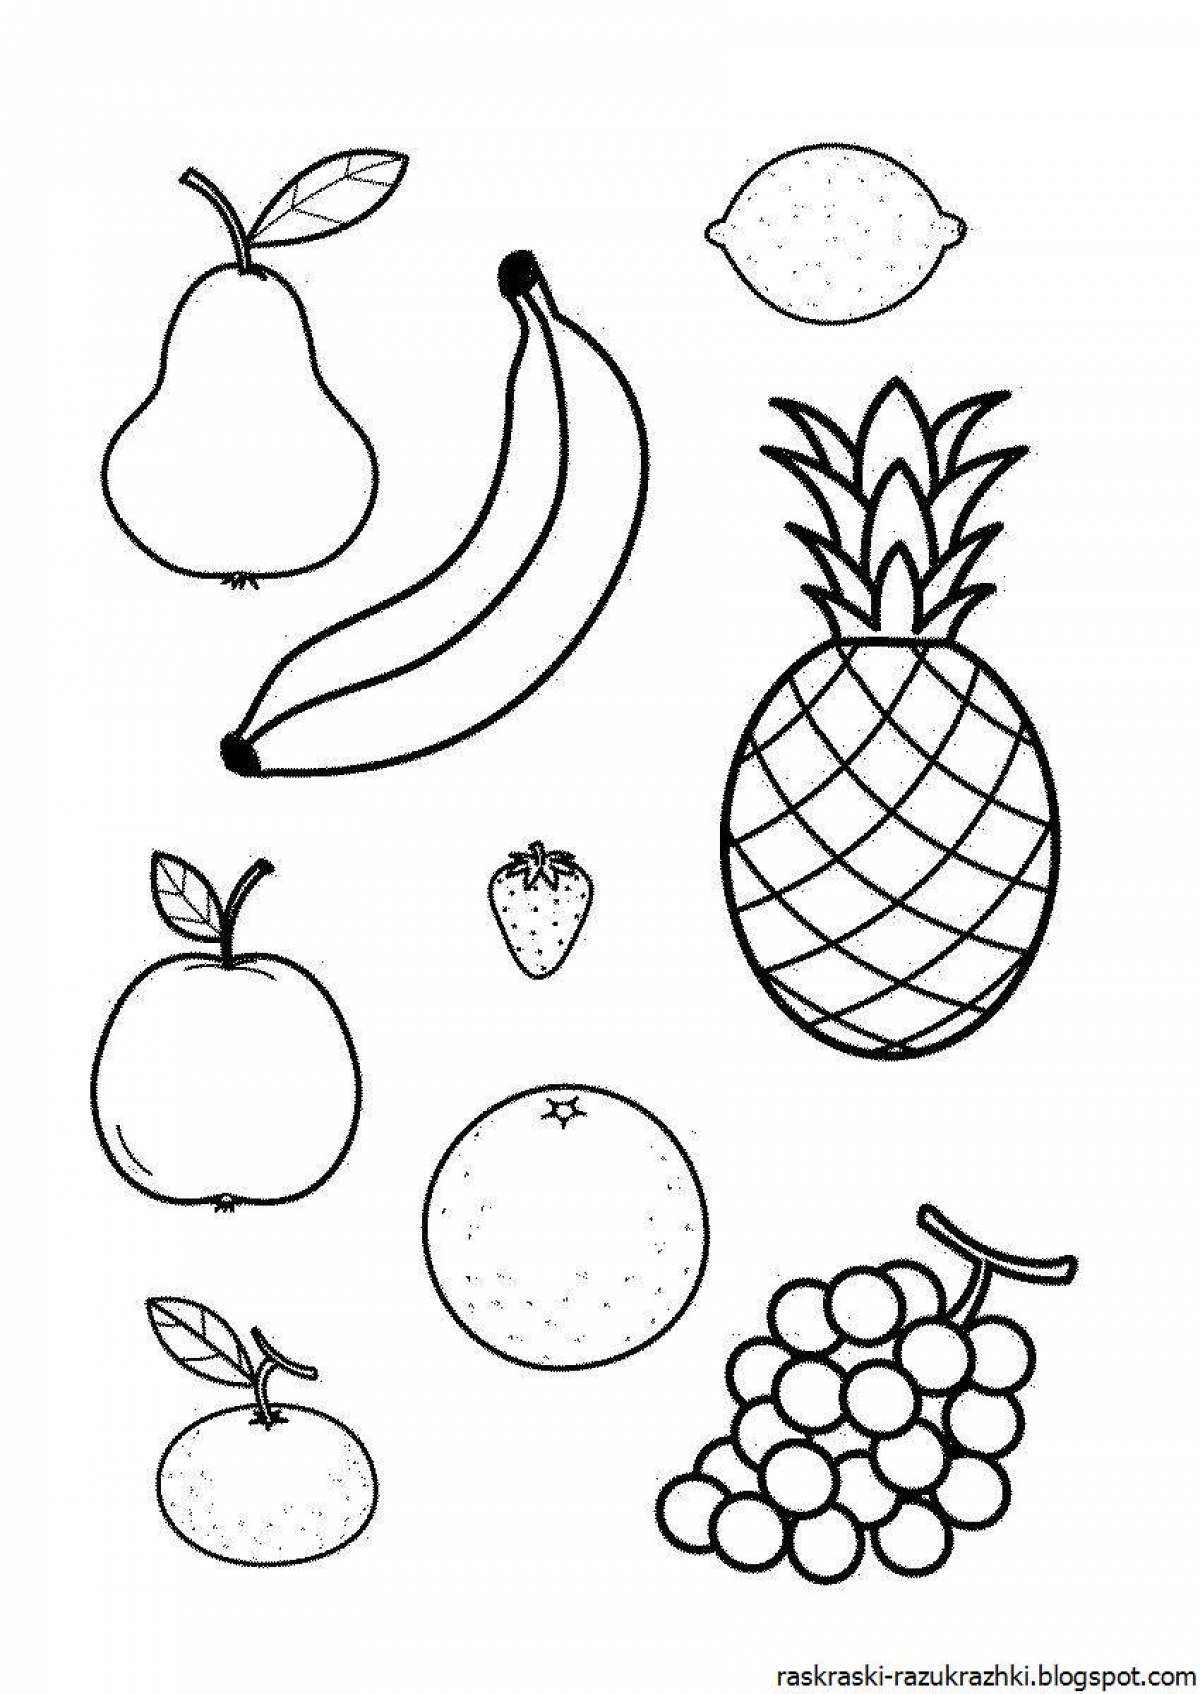 Amazing fruit coloring book for 3-4 year olds